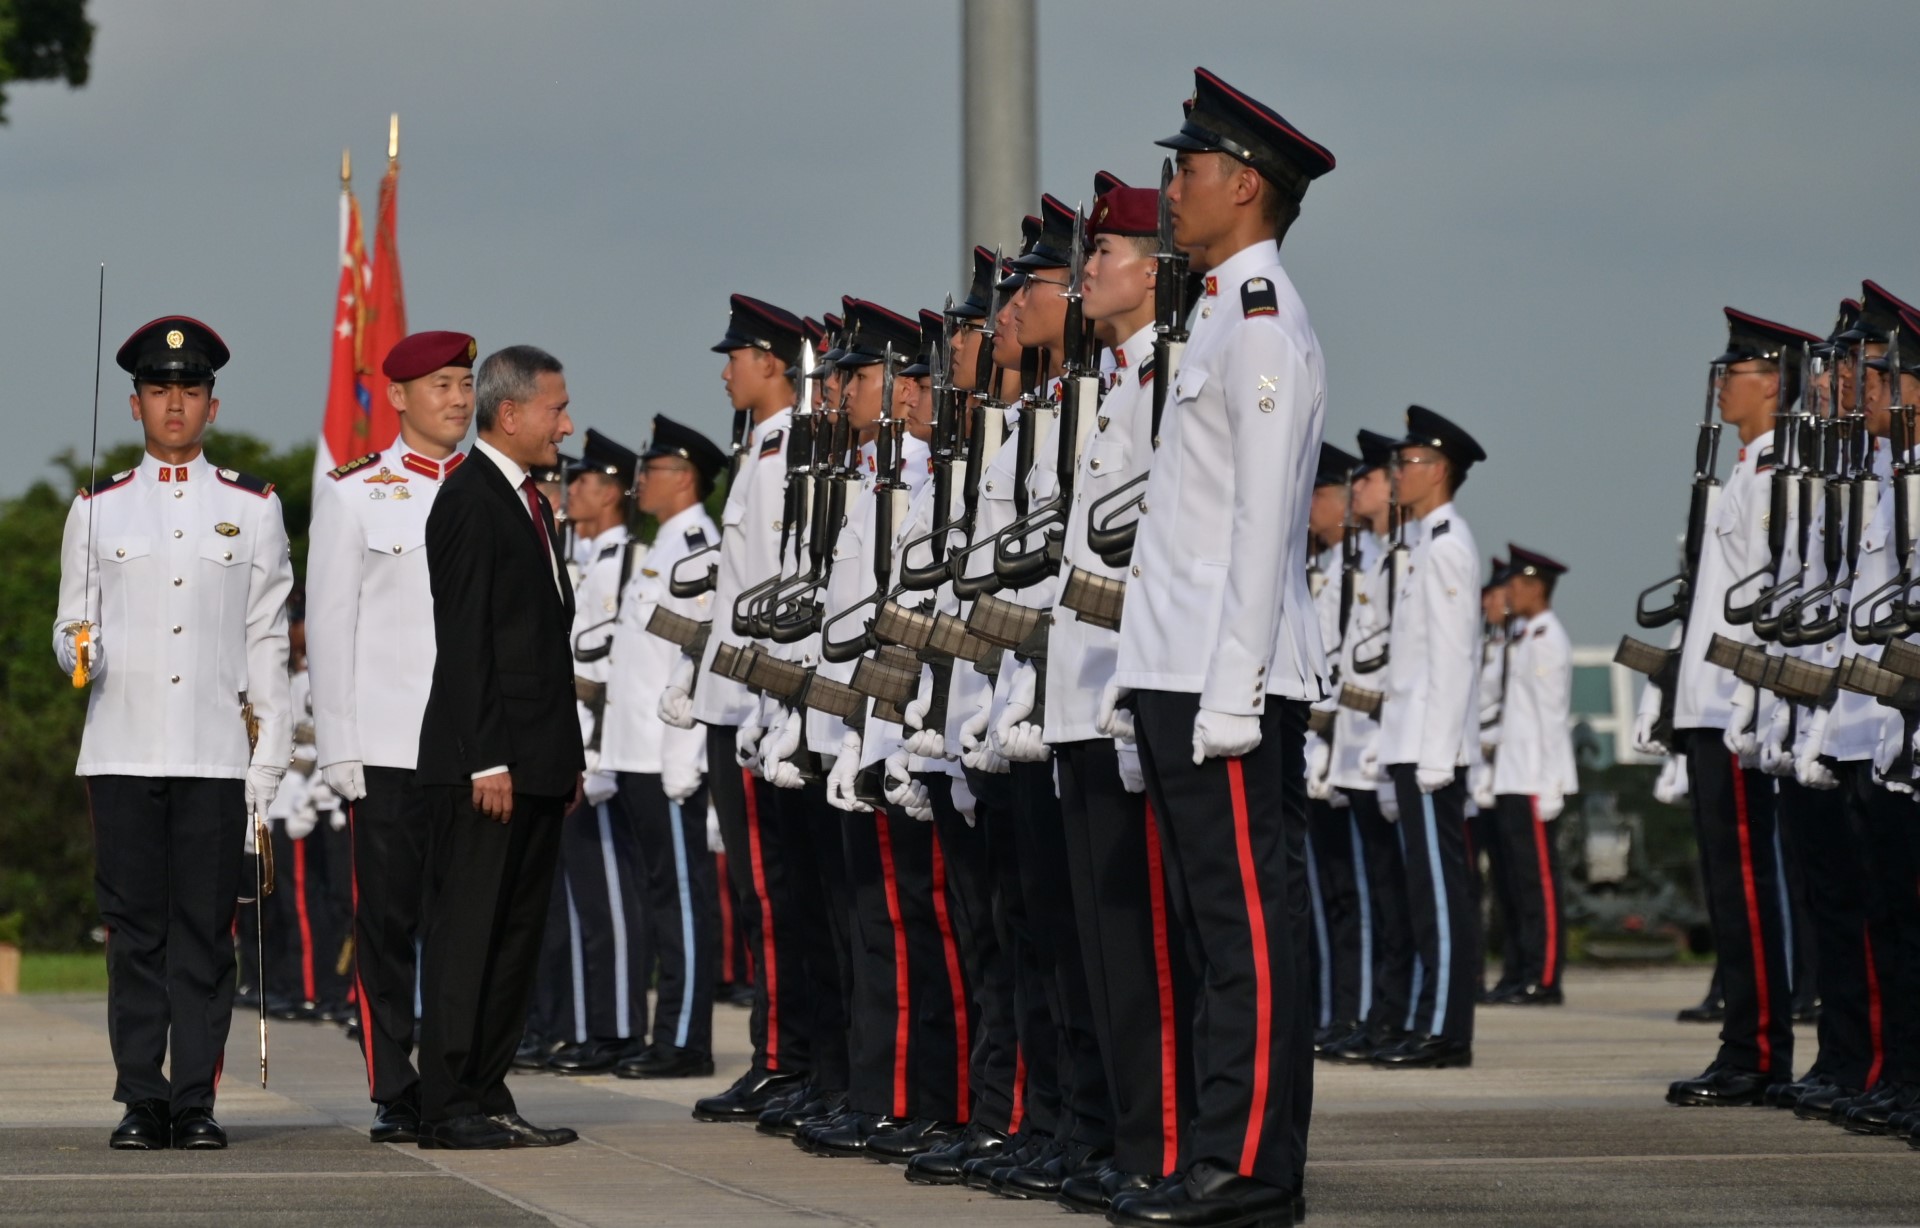 Minister for Foreign Affairs Dr Vivian Balakrishnan reviewing the contingents at the 126th Officer Cadet Commissioning Parade this evening.